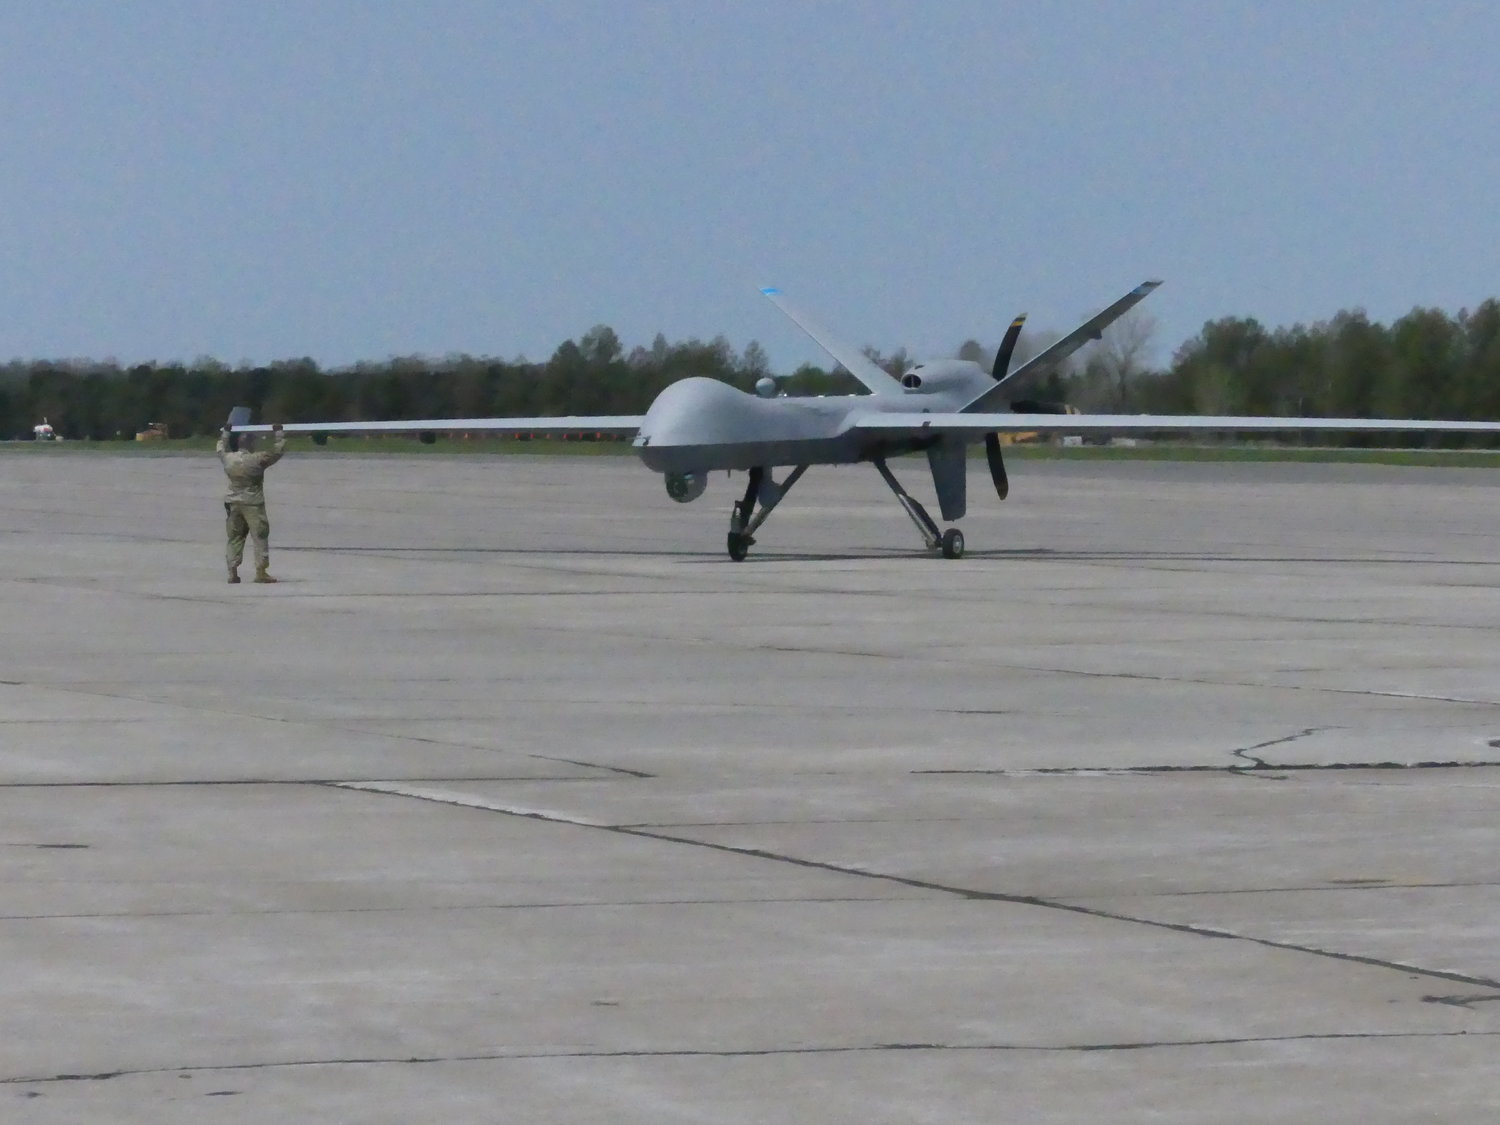 Pictured is an MQ-9 Reaper remotely piloted aircraft, took off from Hancock Field Air National Guard Base in Syracuse and landed at Griffiss International Airport in Rome Thursday, May 5.